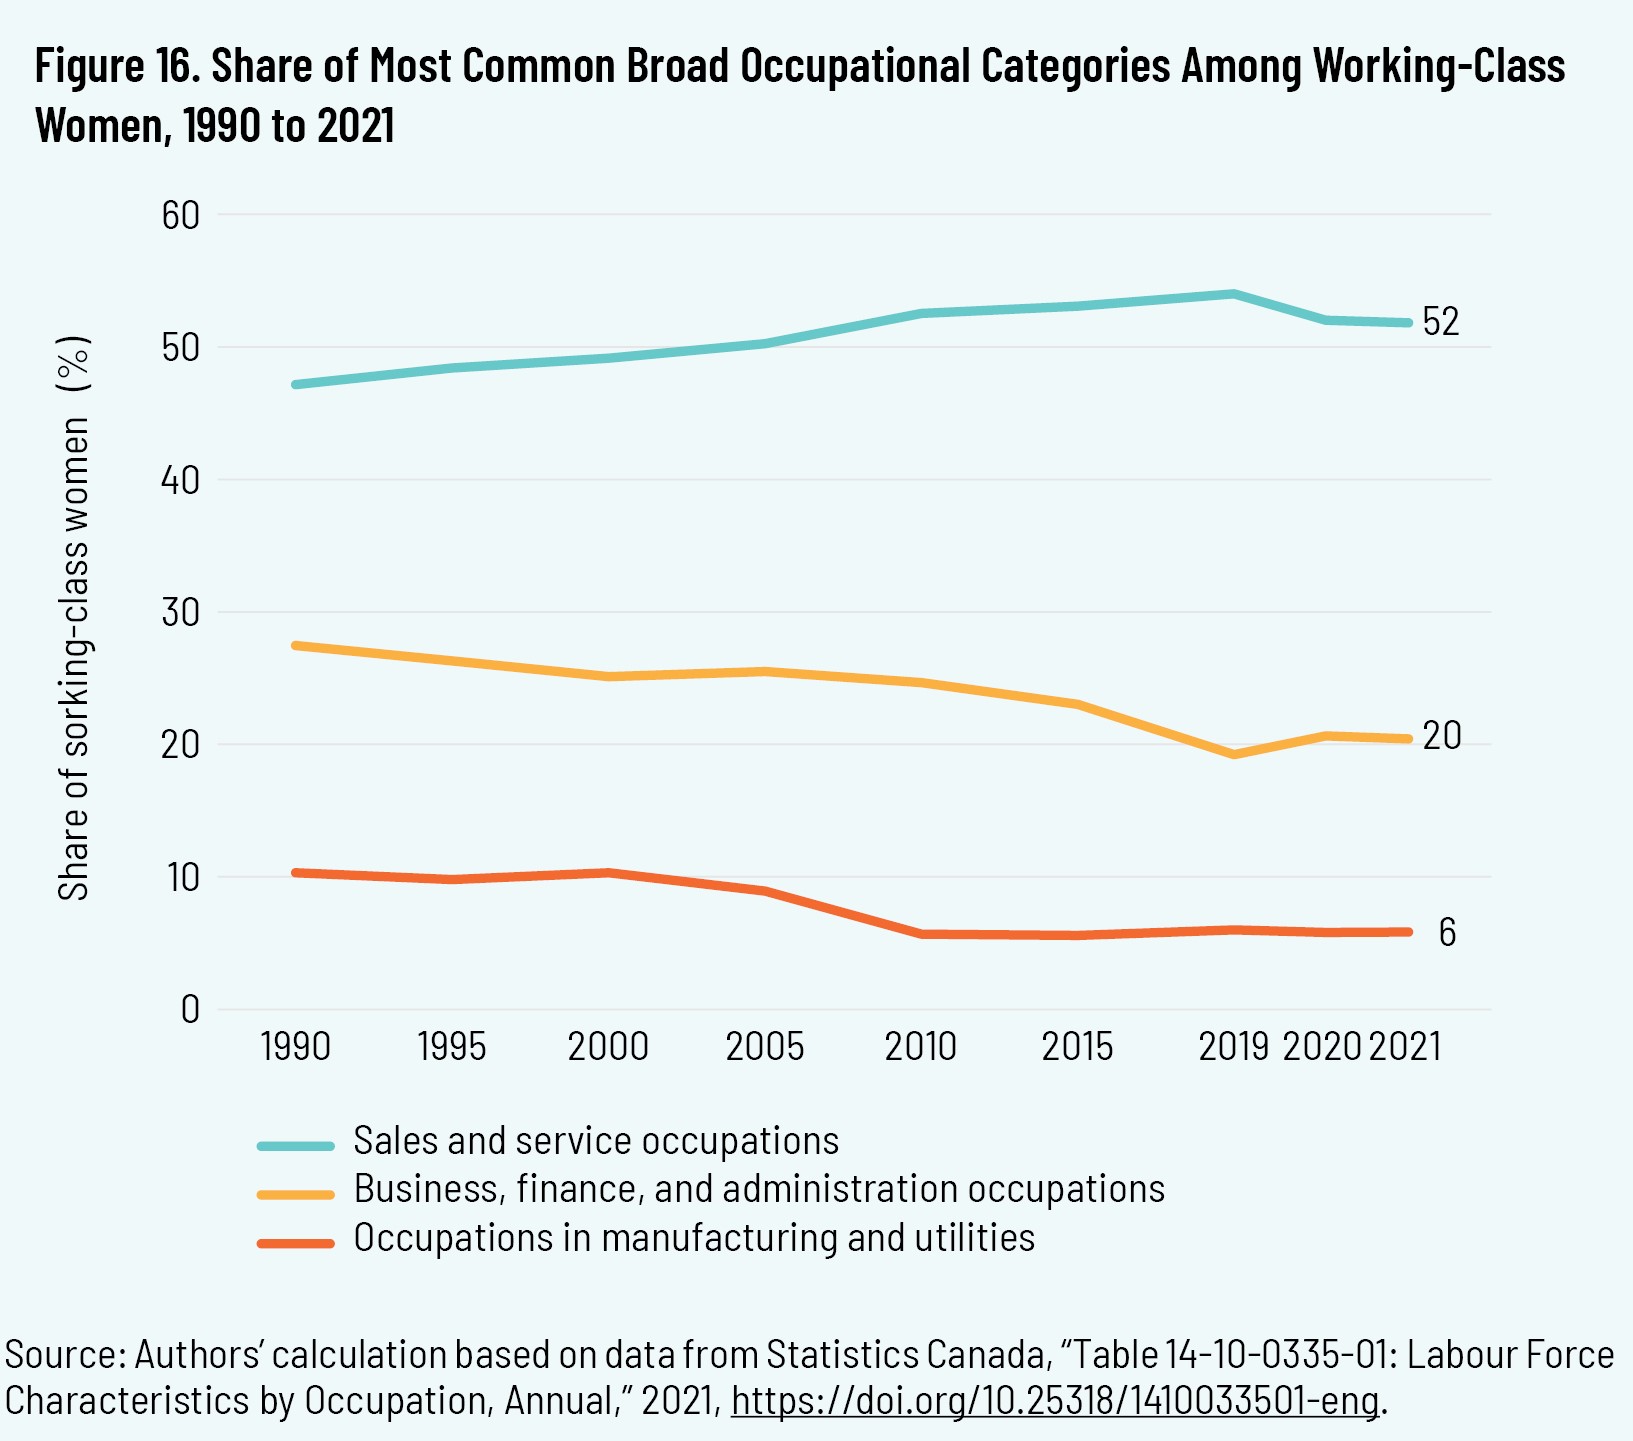 Figure 16. Share of Most Common Broad Occupational Categories Among Working-Class Women, 1990 to 2021